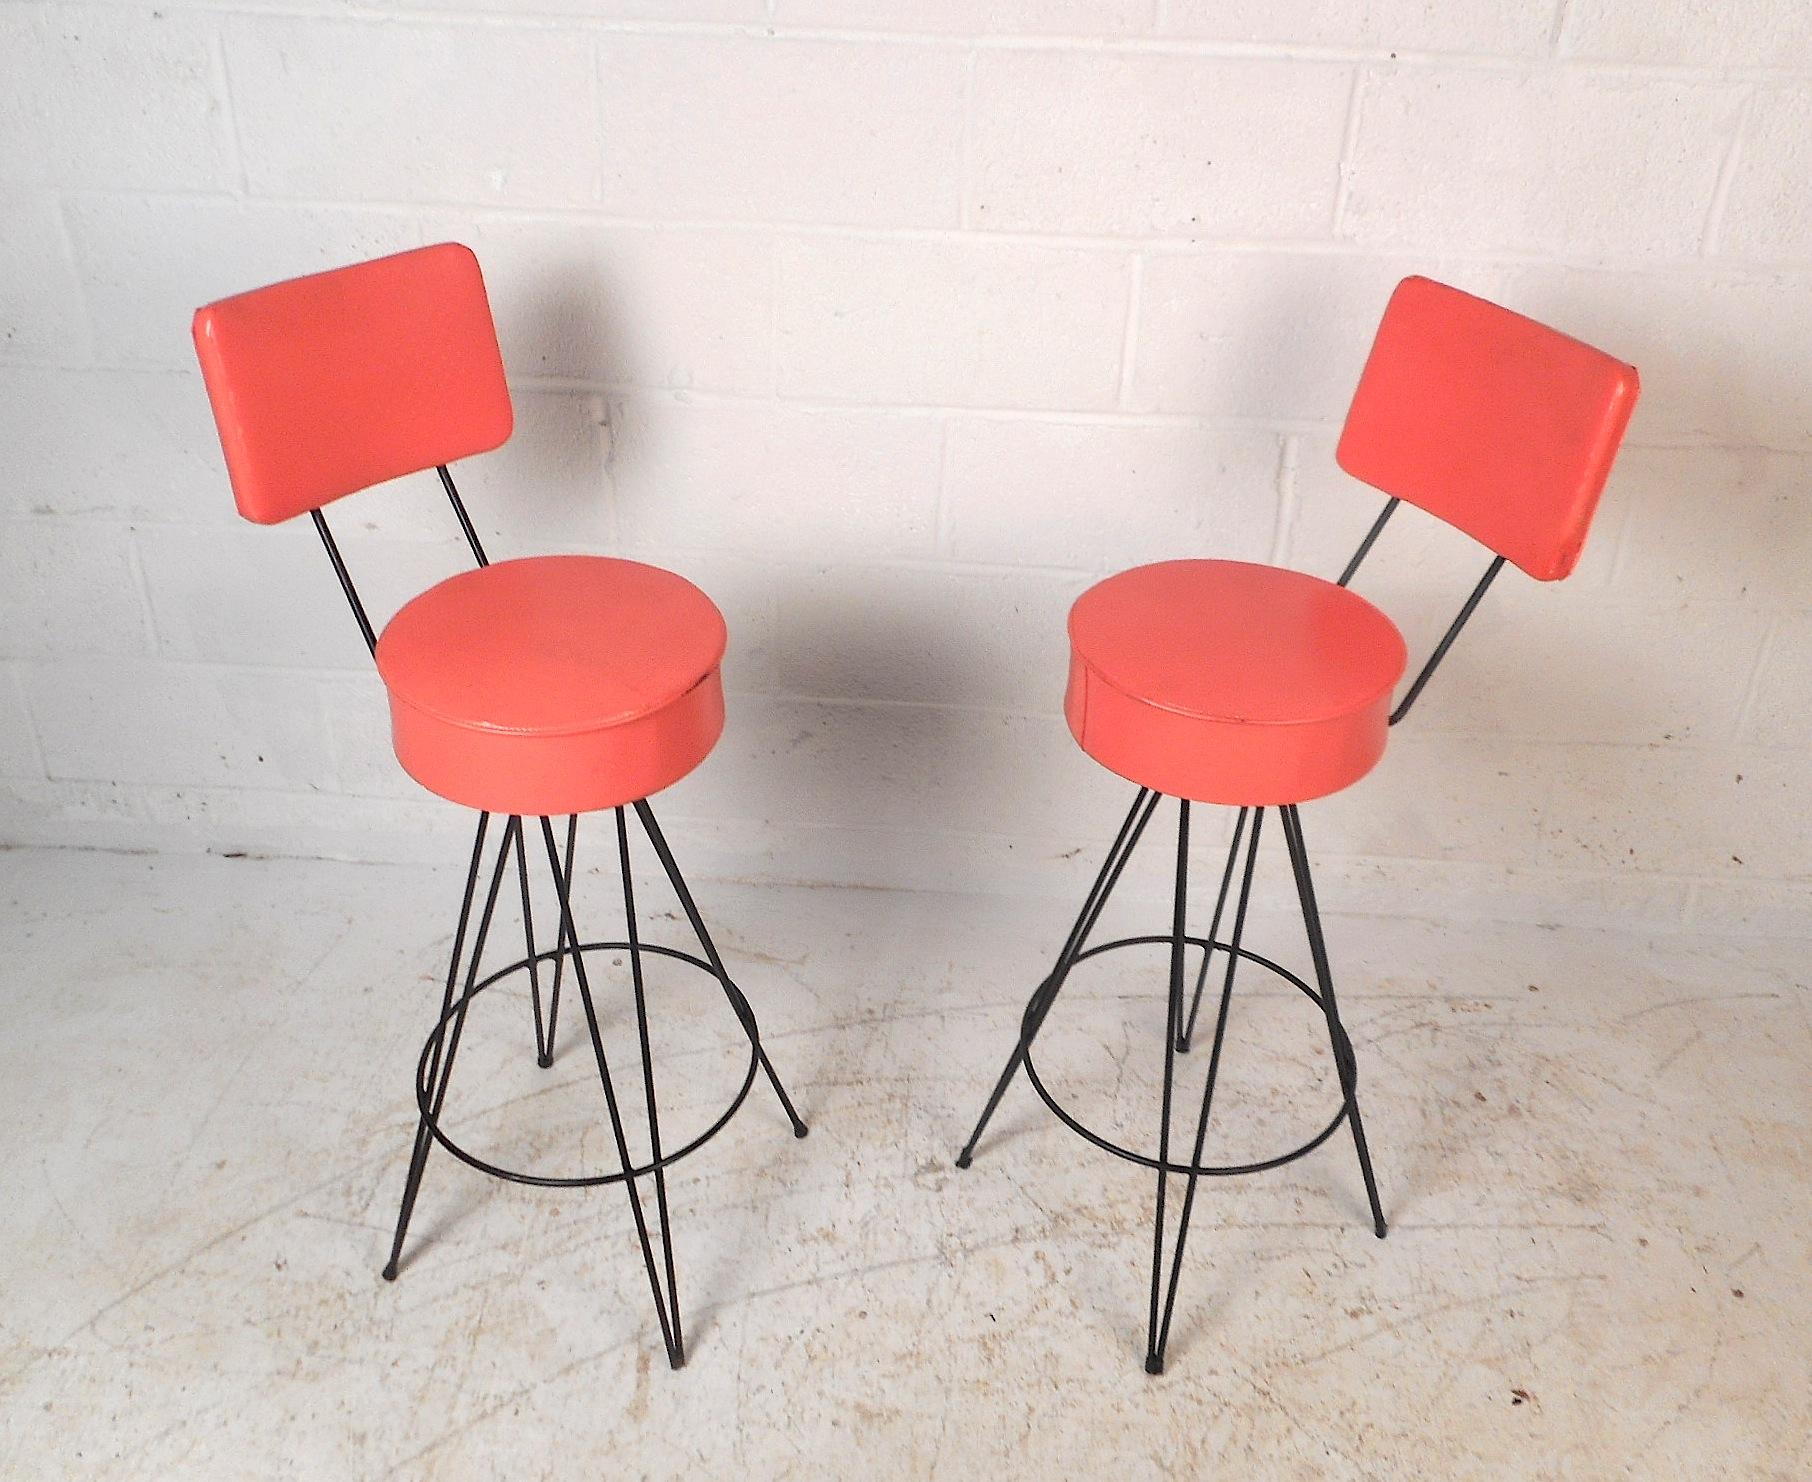 This stylish pair of vintage modern swivel bar stools feature a vibrant salmon colored vinyl upholstery along with sturdy wrought iron hairpin legs. The stools possess a thick seat cushion, padded backrests and a circular iron kickrest. These stools